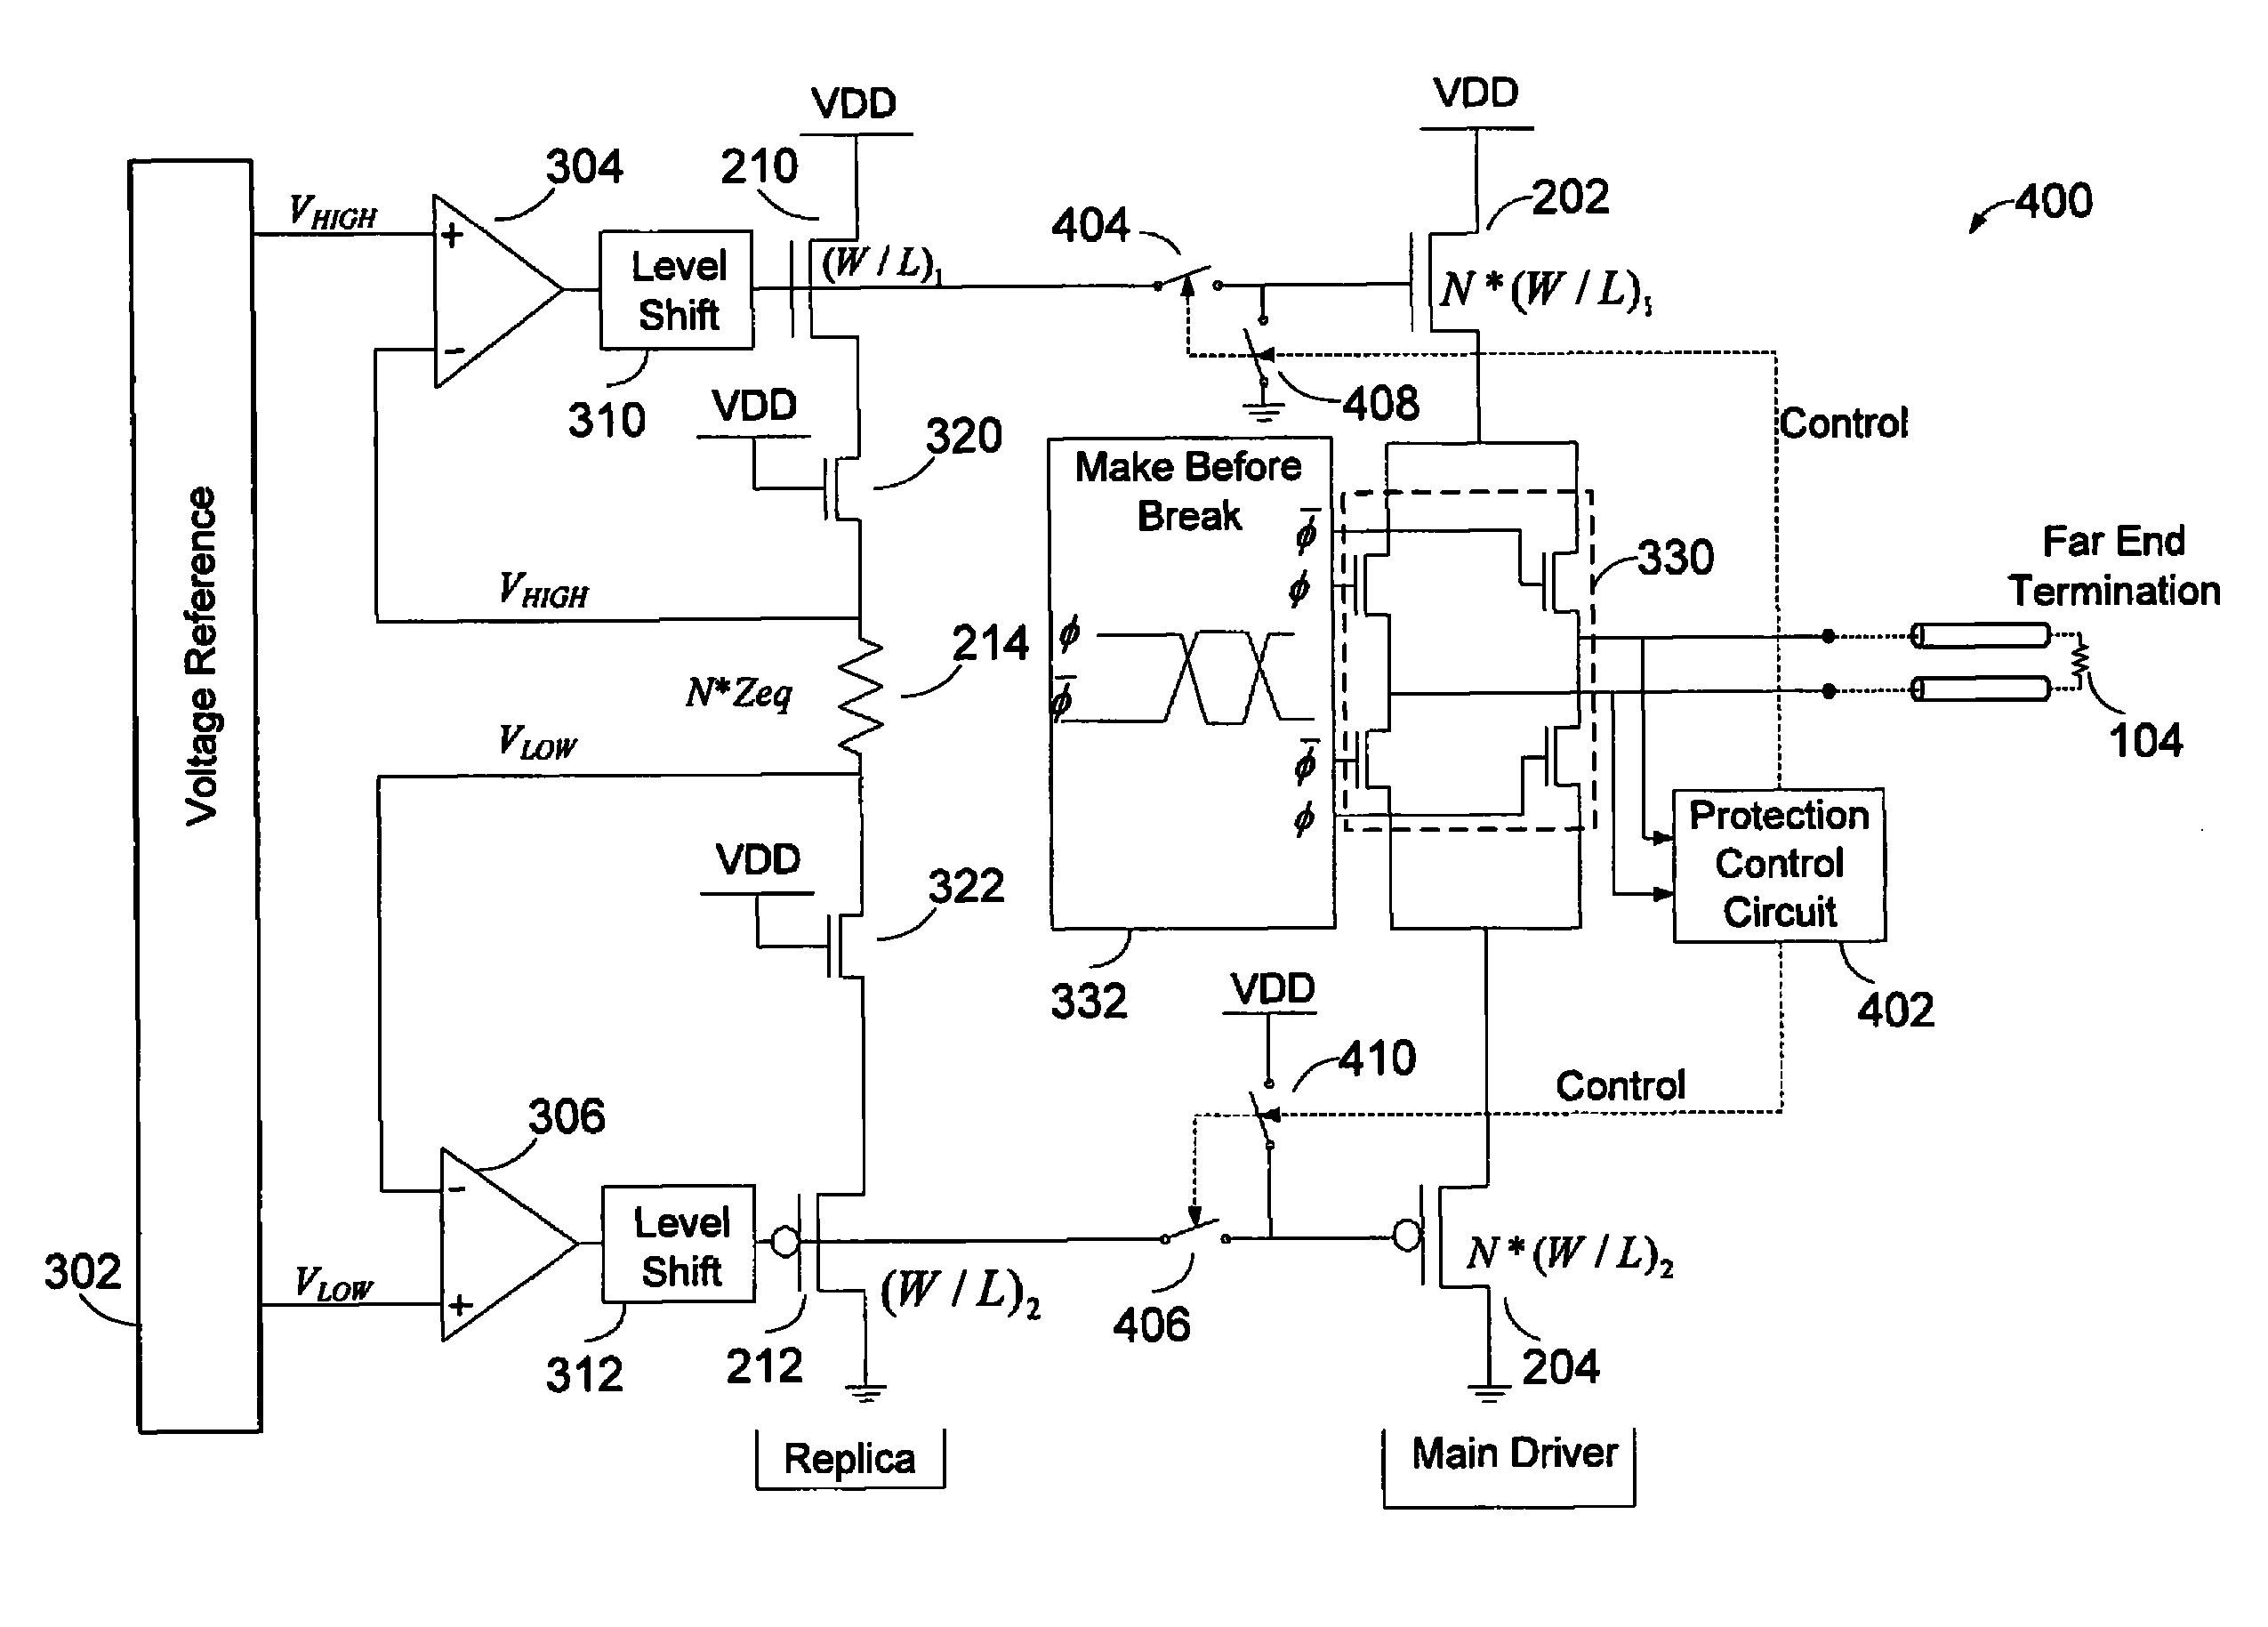 Hot-pluggable differential signaling driver